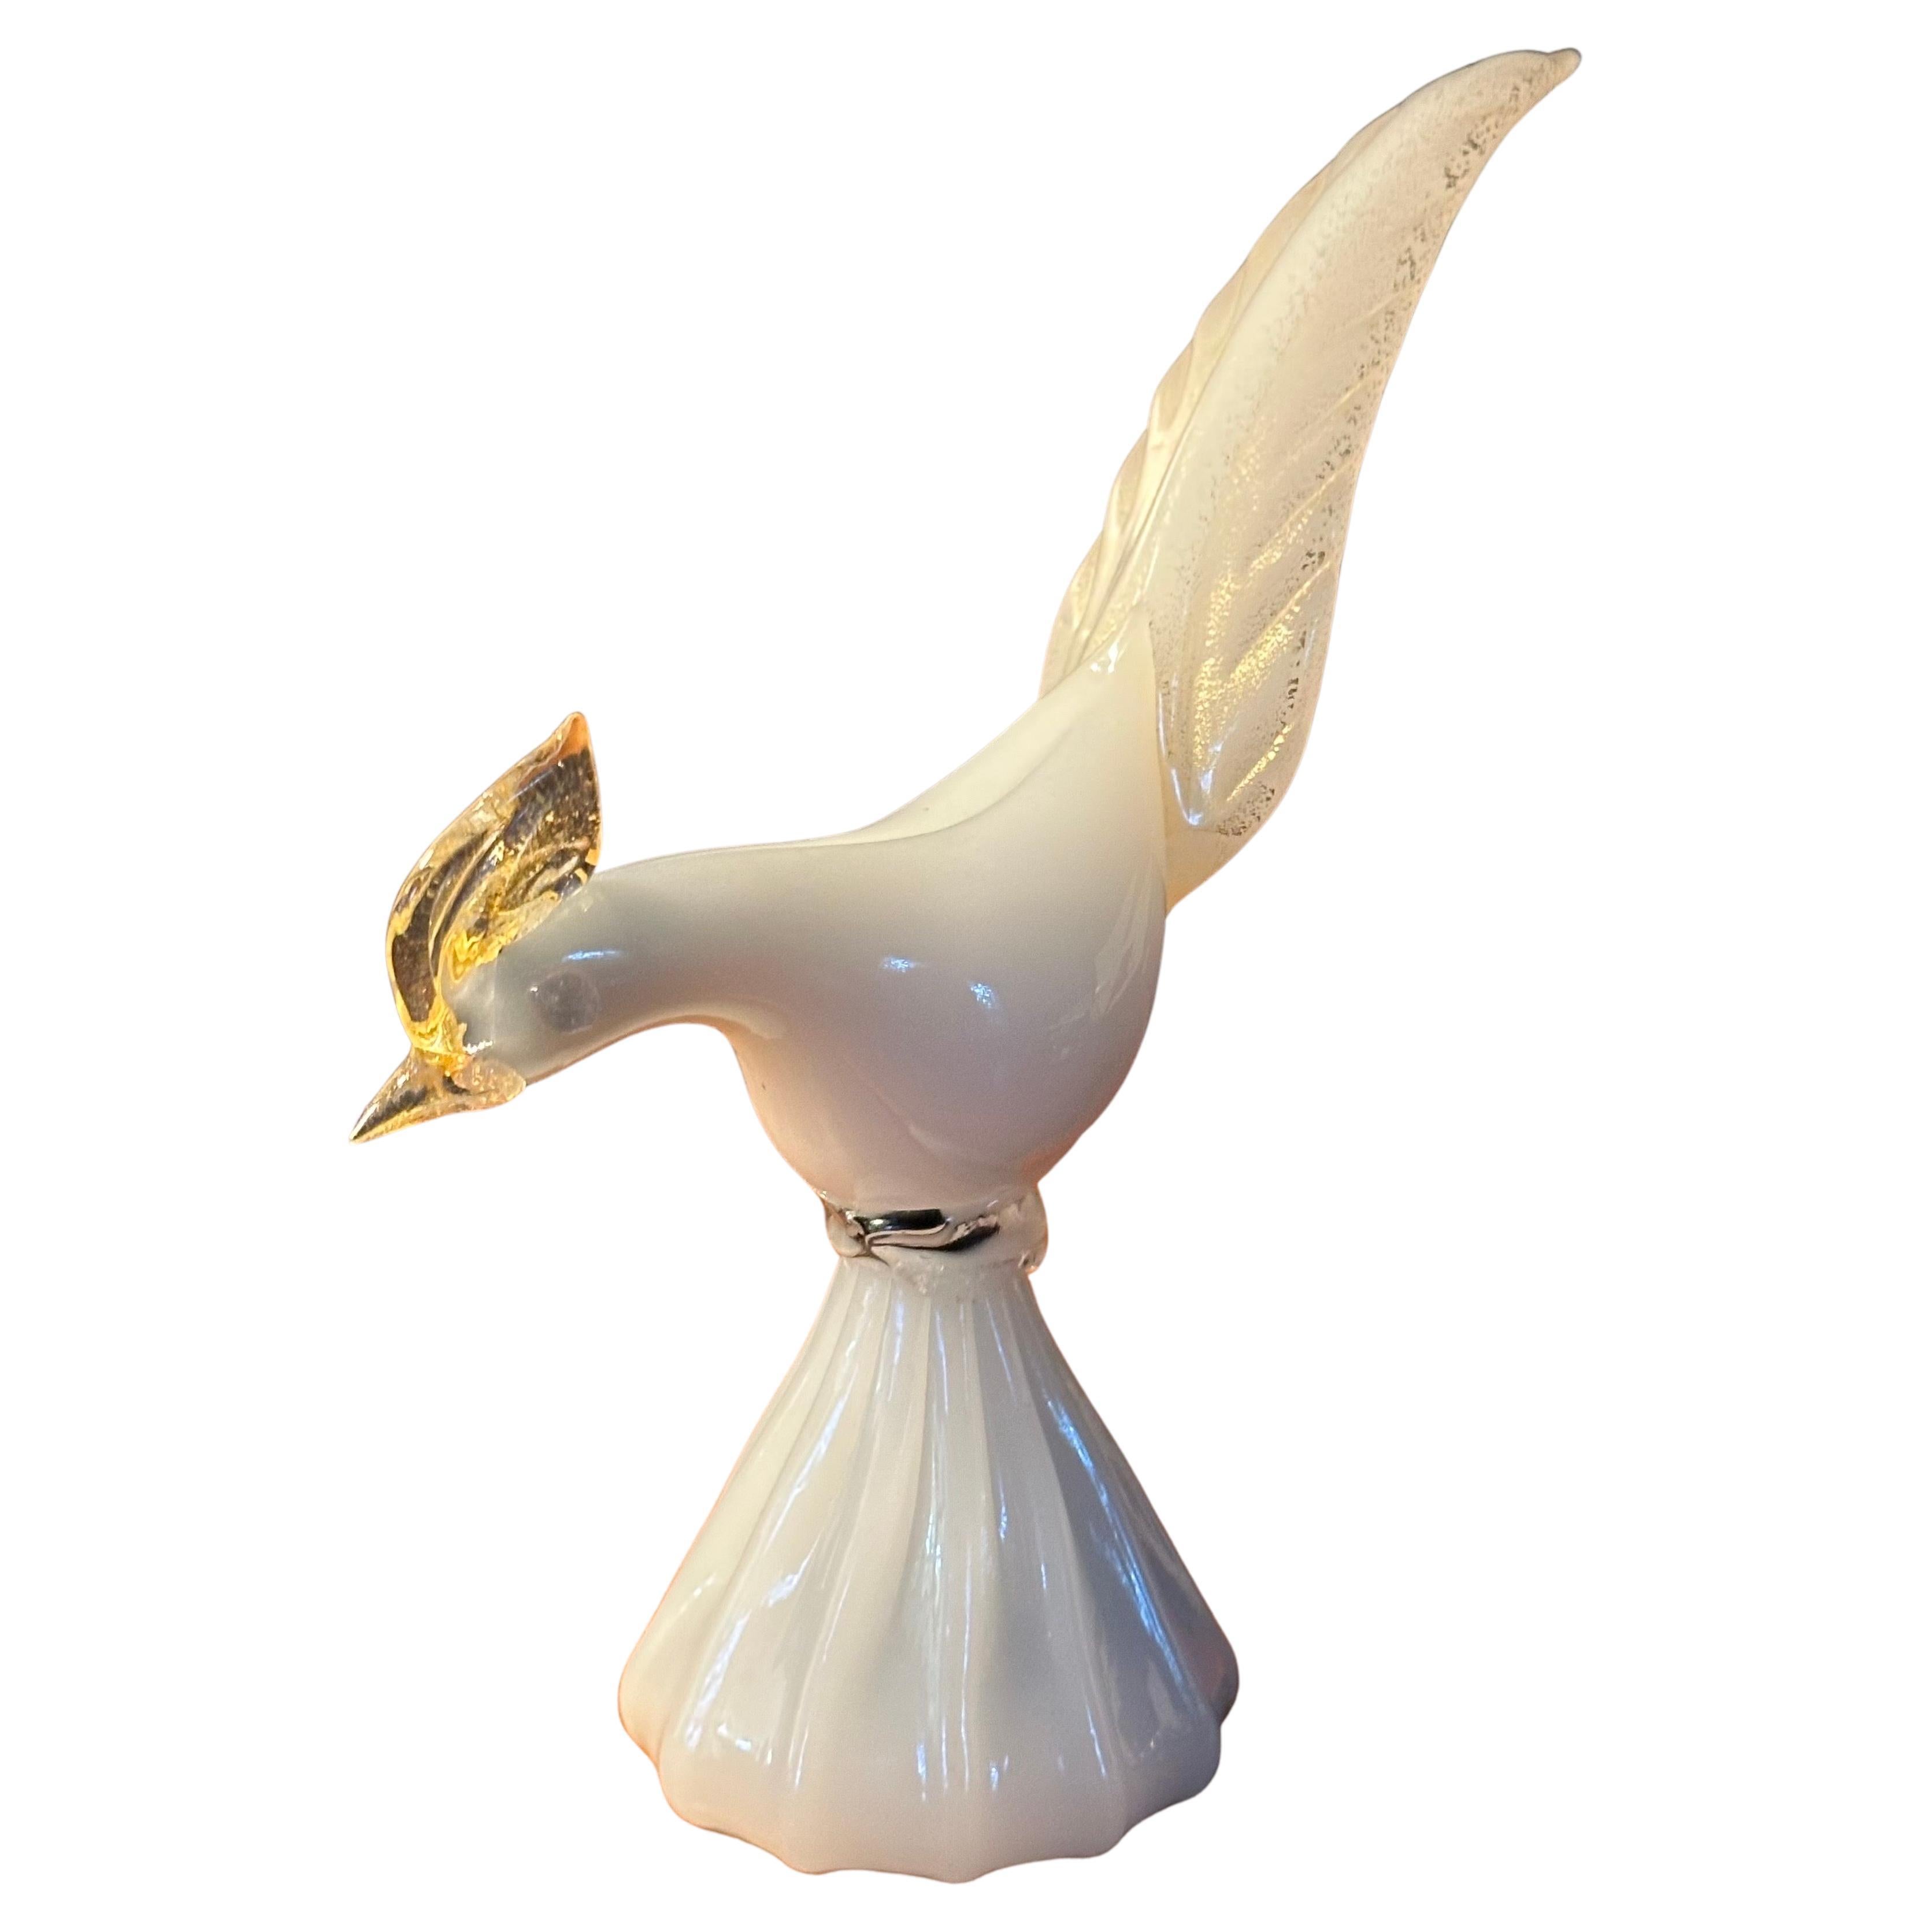 How can you tell if a bird is Murano glass?